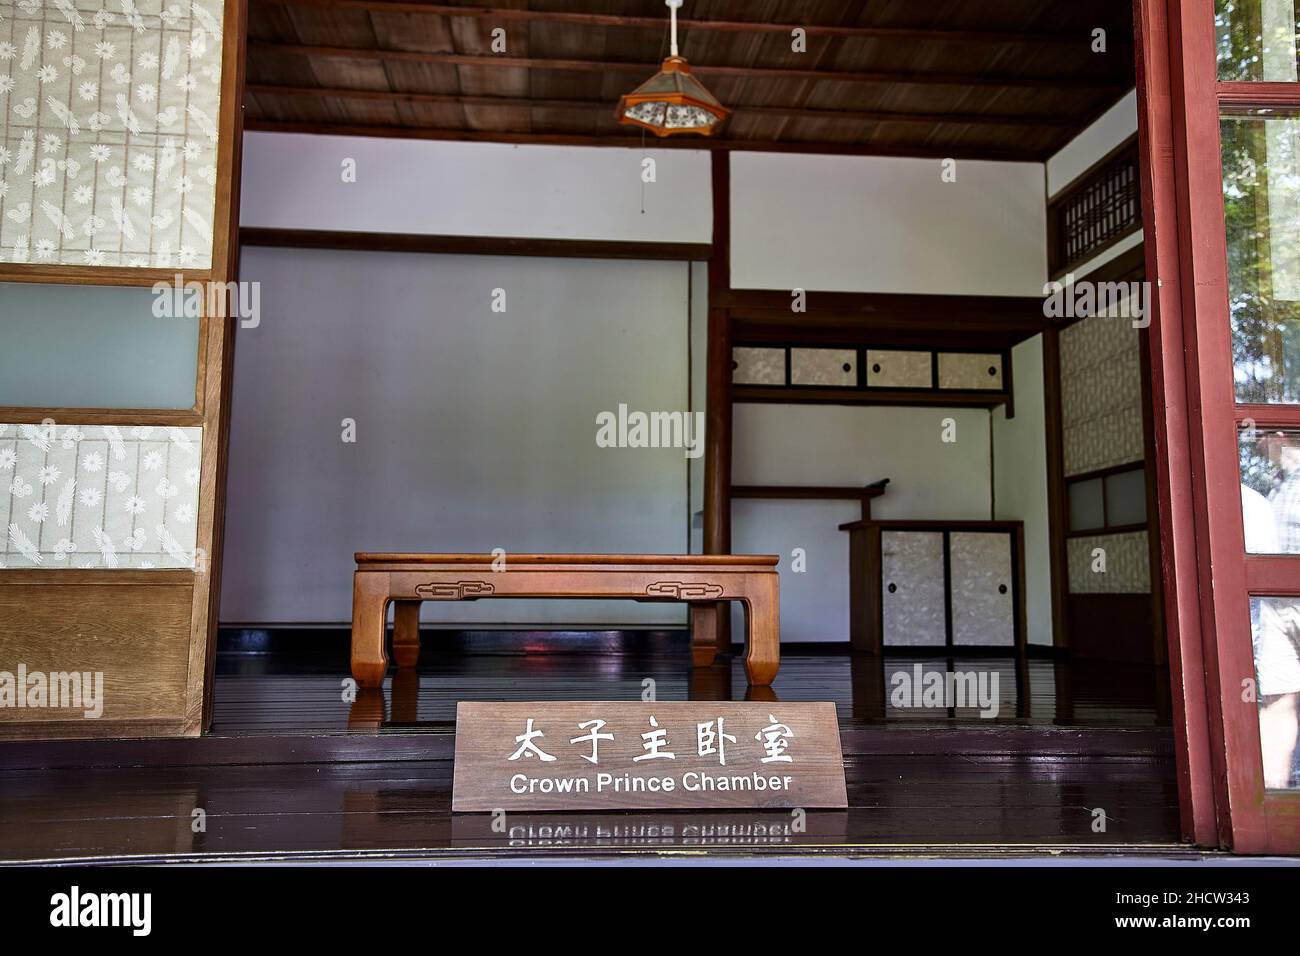 View of a signboard indicating the Crown Prince Chamber room of a heritage Japanese house inside the Jinguashi Ecological park. Stock Photo